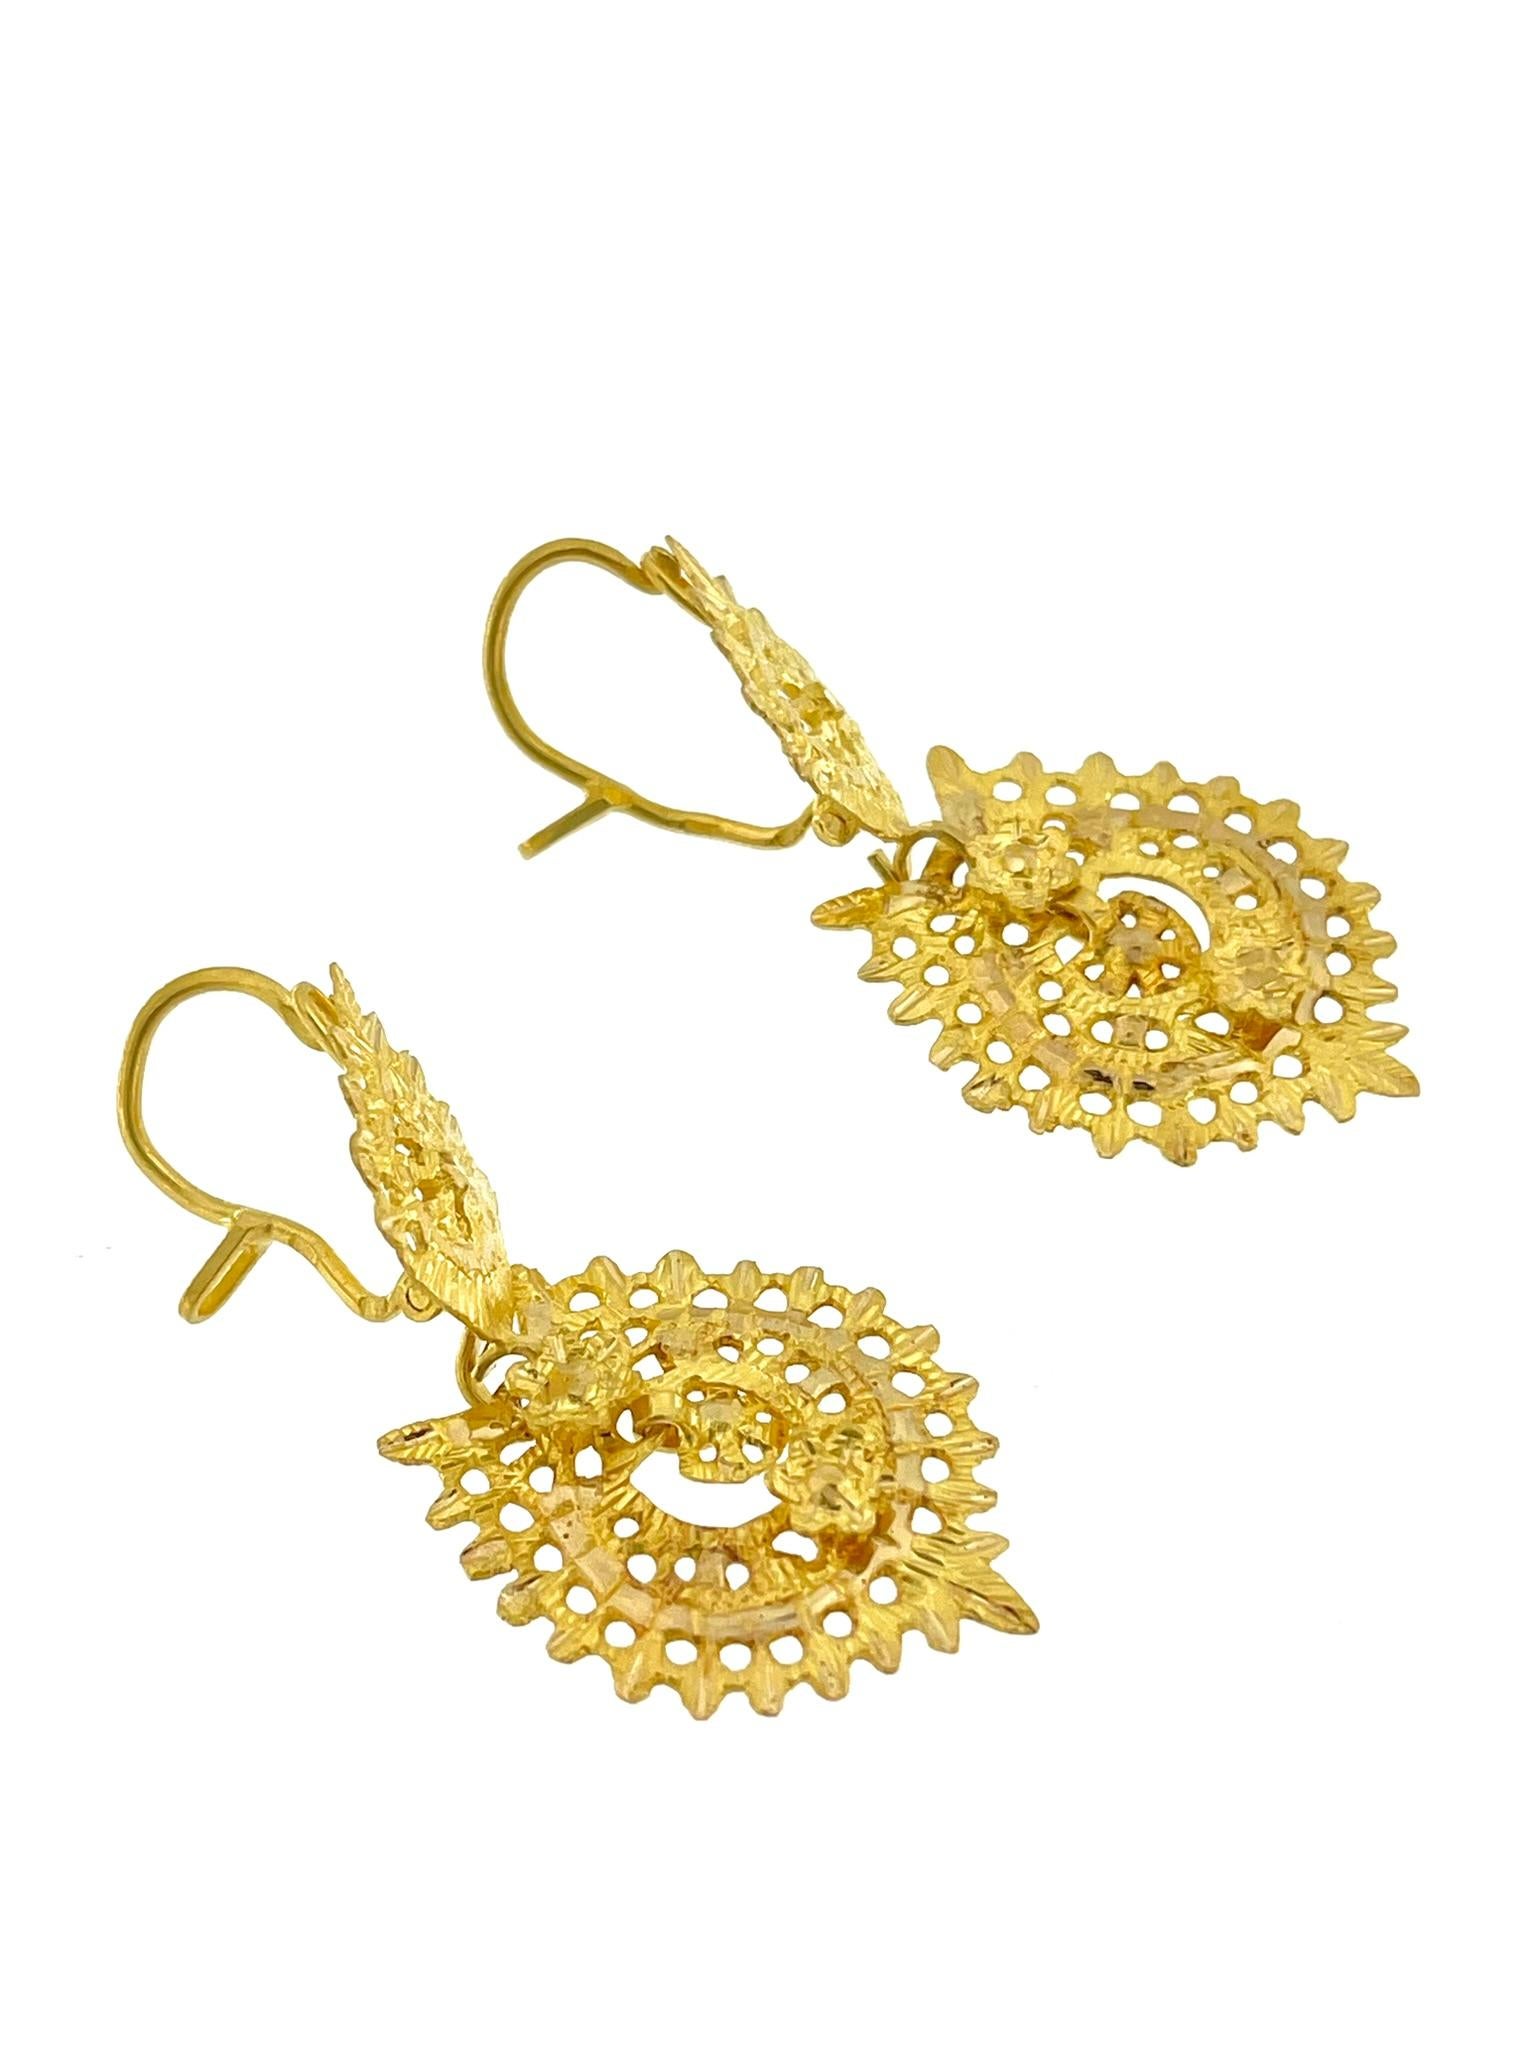 The Traditional Portuguese Queen Earrings in Yellow Gold are a splendid example of the intricate art of filigree, a technique highly esteemed in Portuguese jewelry craftsmanship. Fashioned from 19-karat yellow gold, these earrings exude a regal